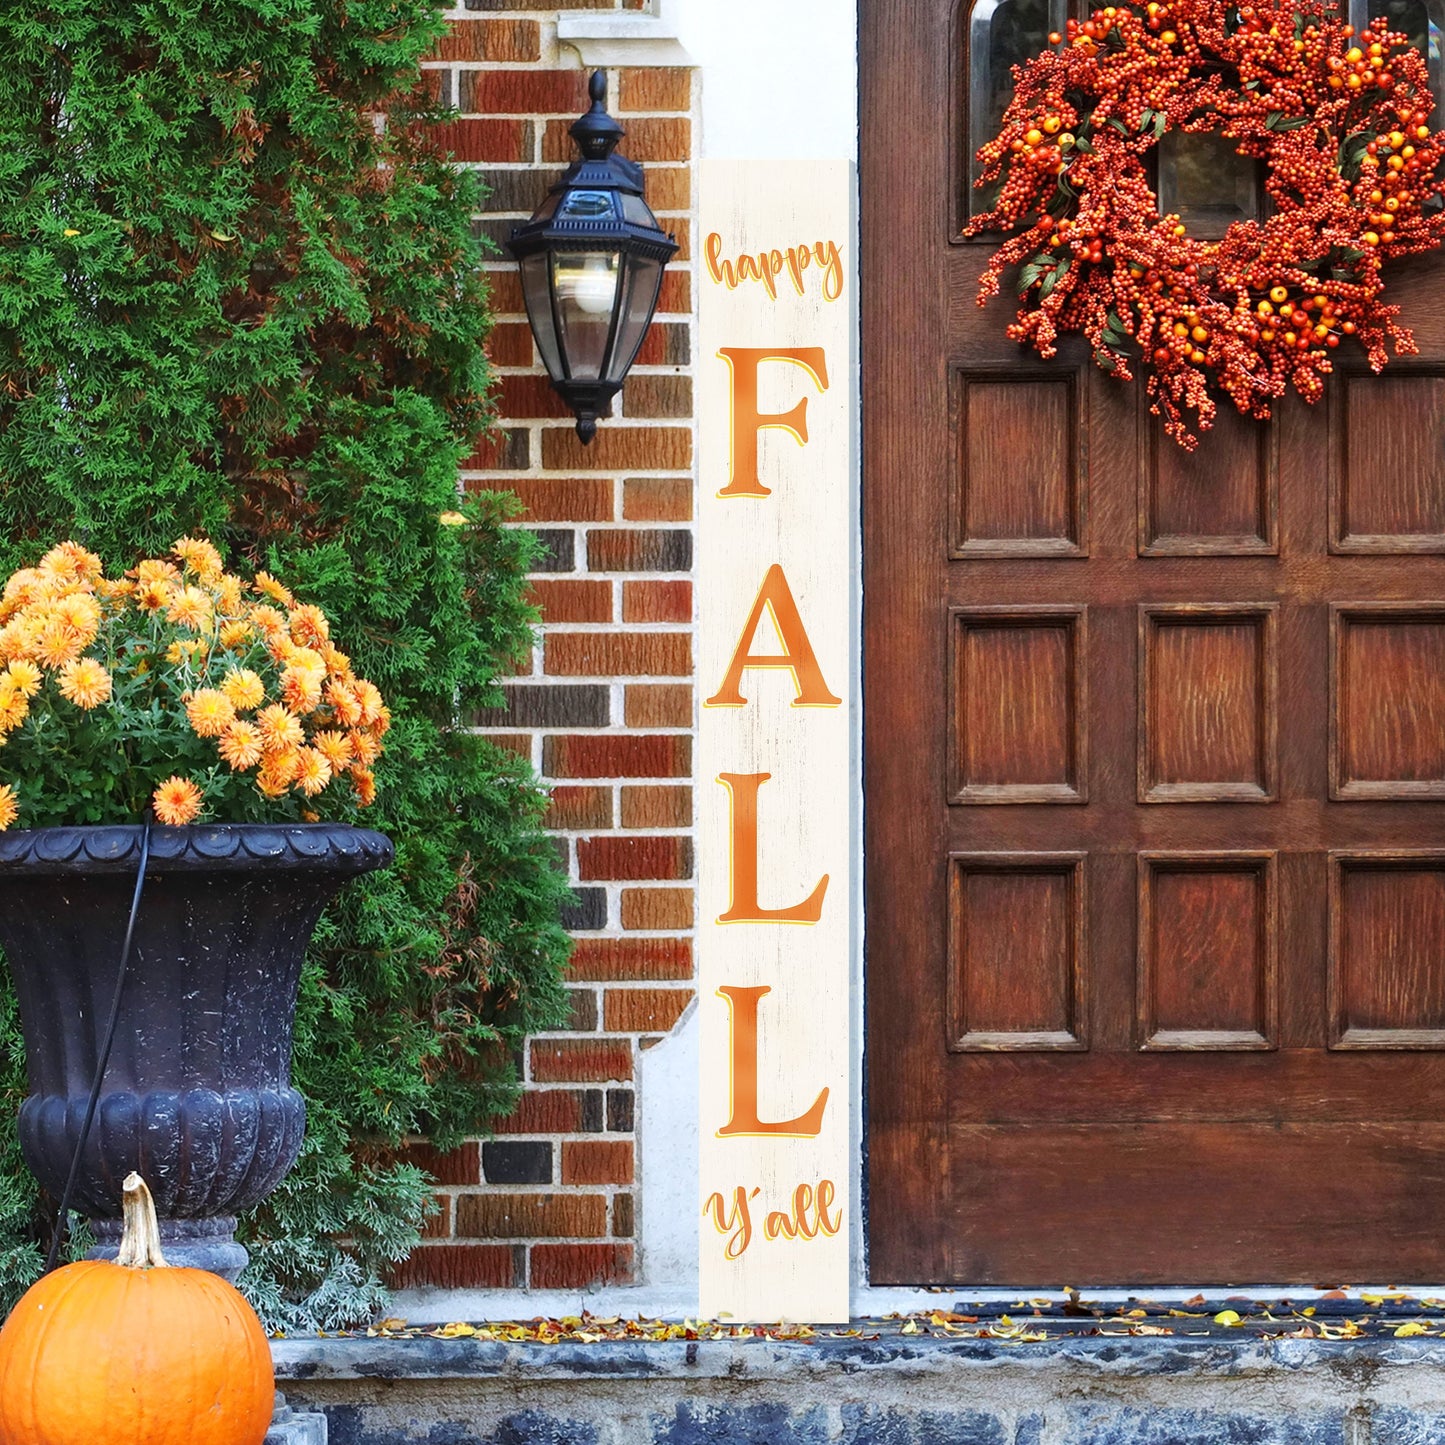 72in "Happy Fall Y'all" Porch Sign | Front Door Display | Ideal Porch Decor | Perfect for Autumn Celebrations